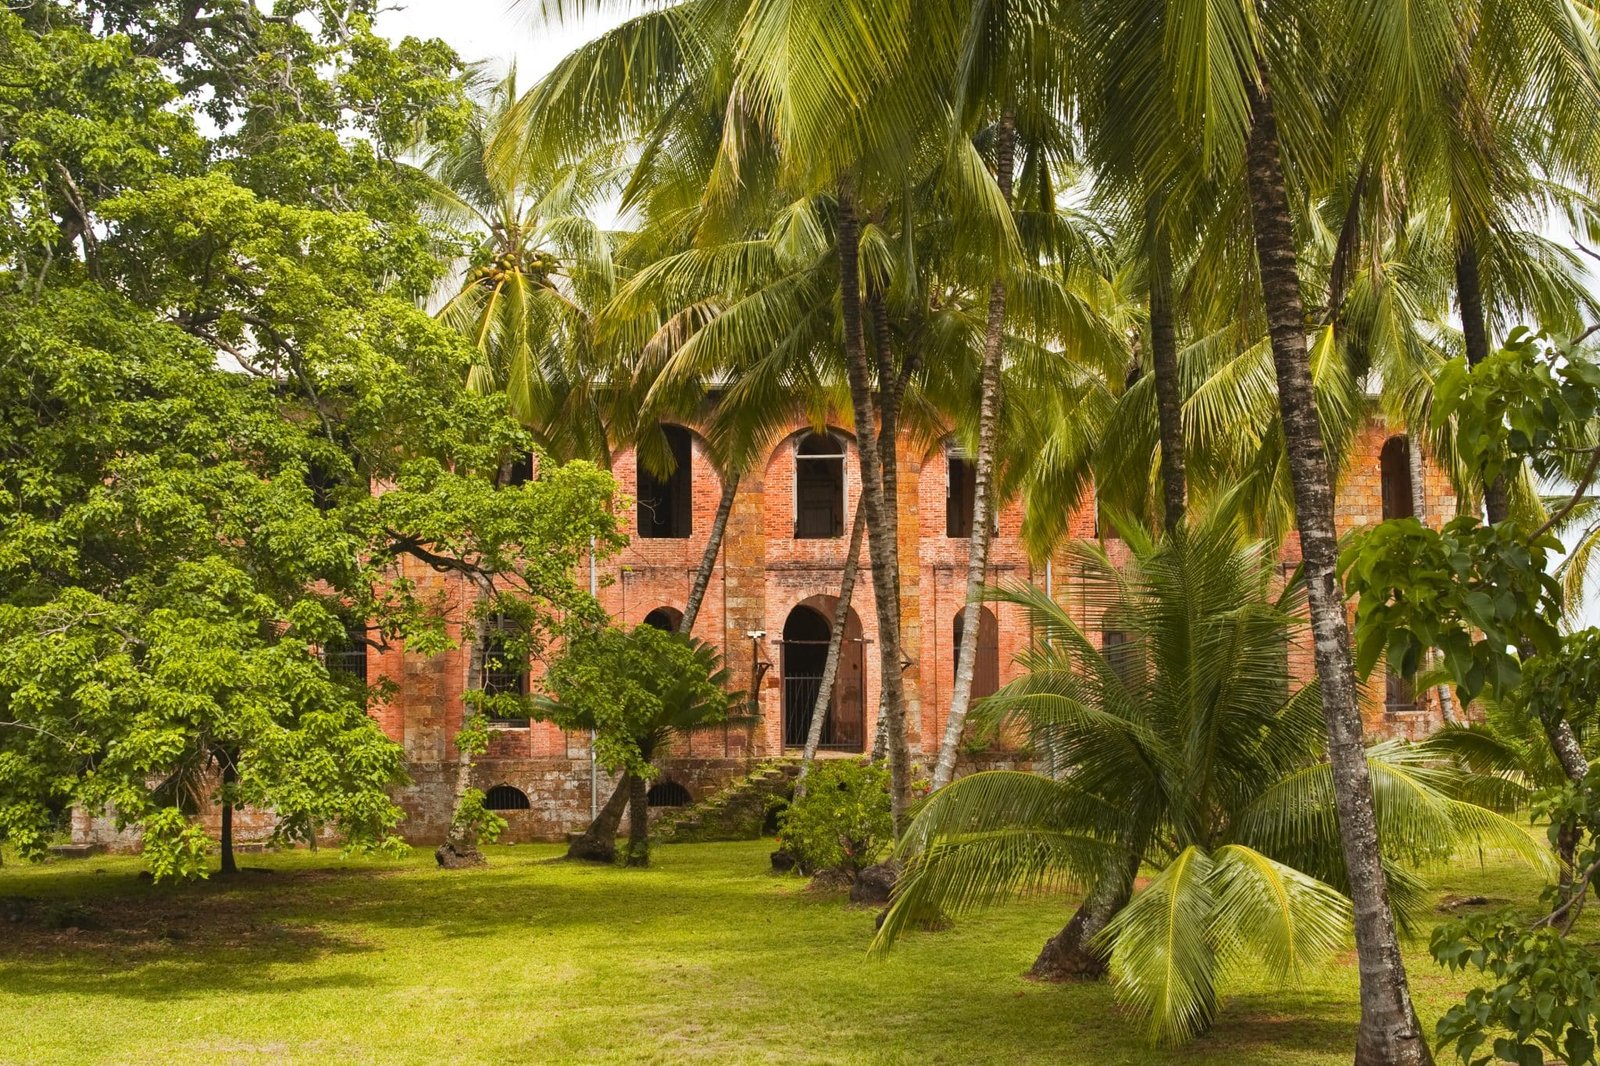 The old hospital building on Devil's island off the coast of French Guiana. The island was a former prison colony.